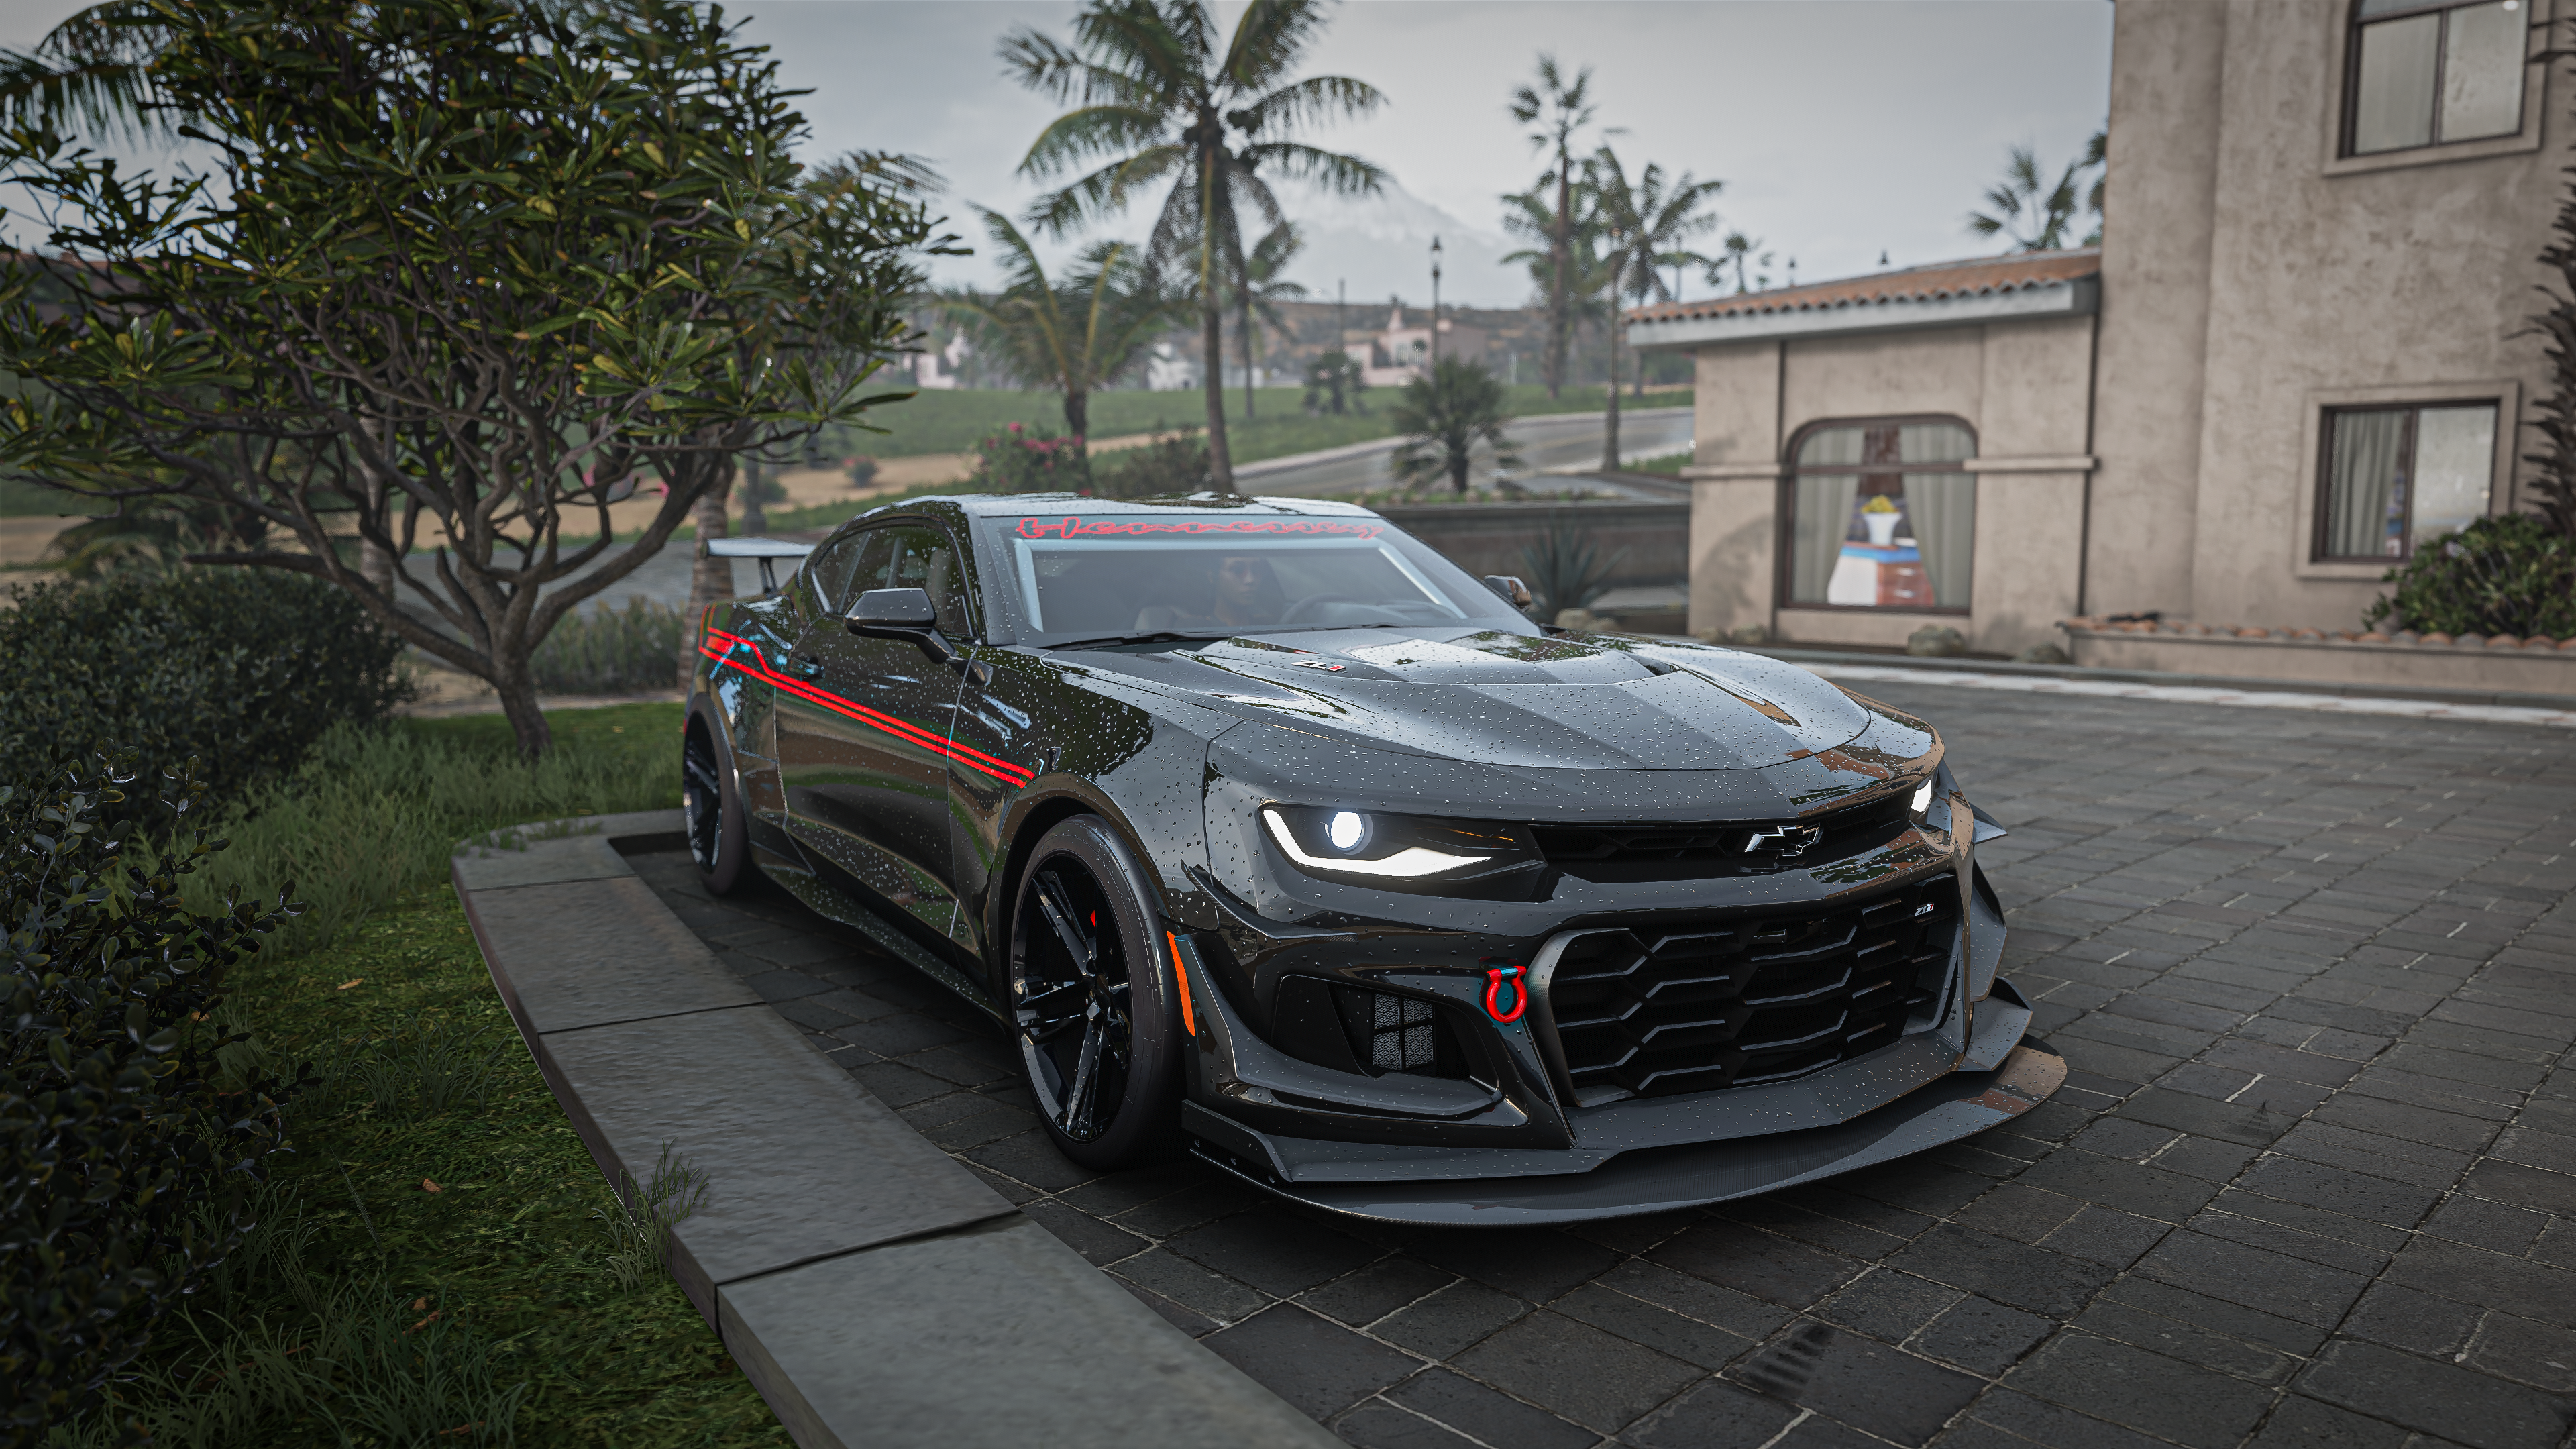 General 3840x2160 Forza Horizon 5 Forza Horizon Forza Hennessey video games palm trees race cars muscle cars American cars PlaygroundGames car headlights Horizon Festival vehicle Chevrolet Camaro video game art screen shot frontal view grass wet reflection CGI